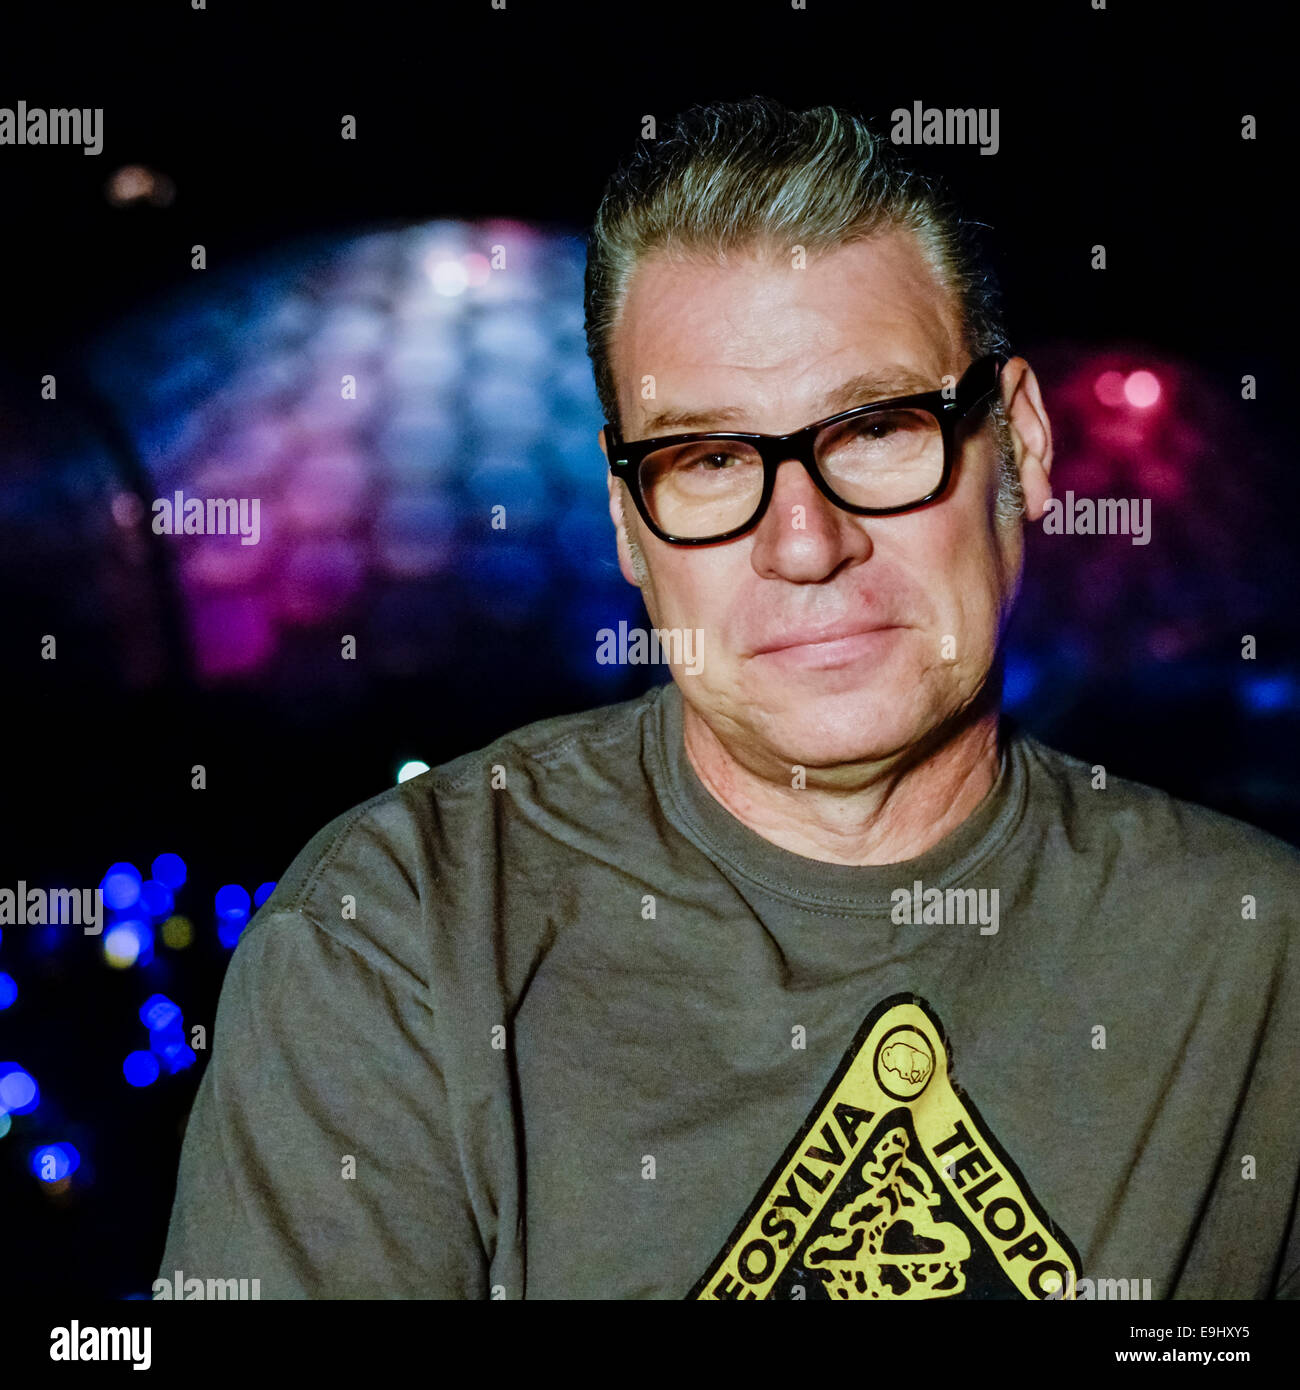 26/10/2014: The Eden Project, Cornwall. Mark Kermode presents one of his favorite films "SILENT RUNNING" Stock Photo